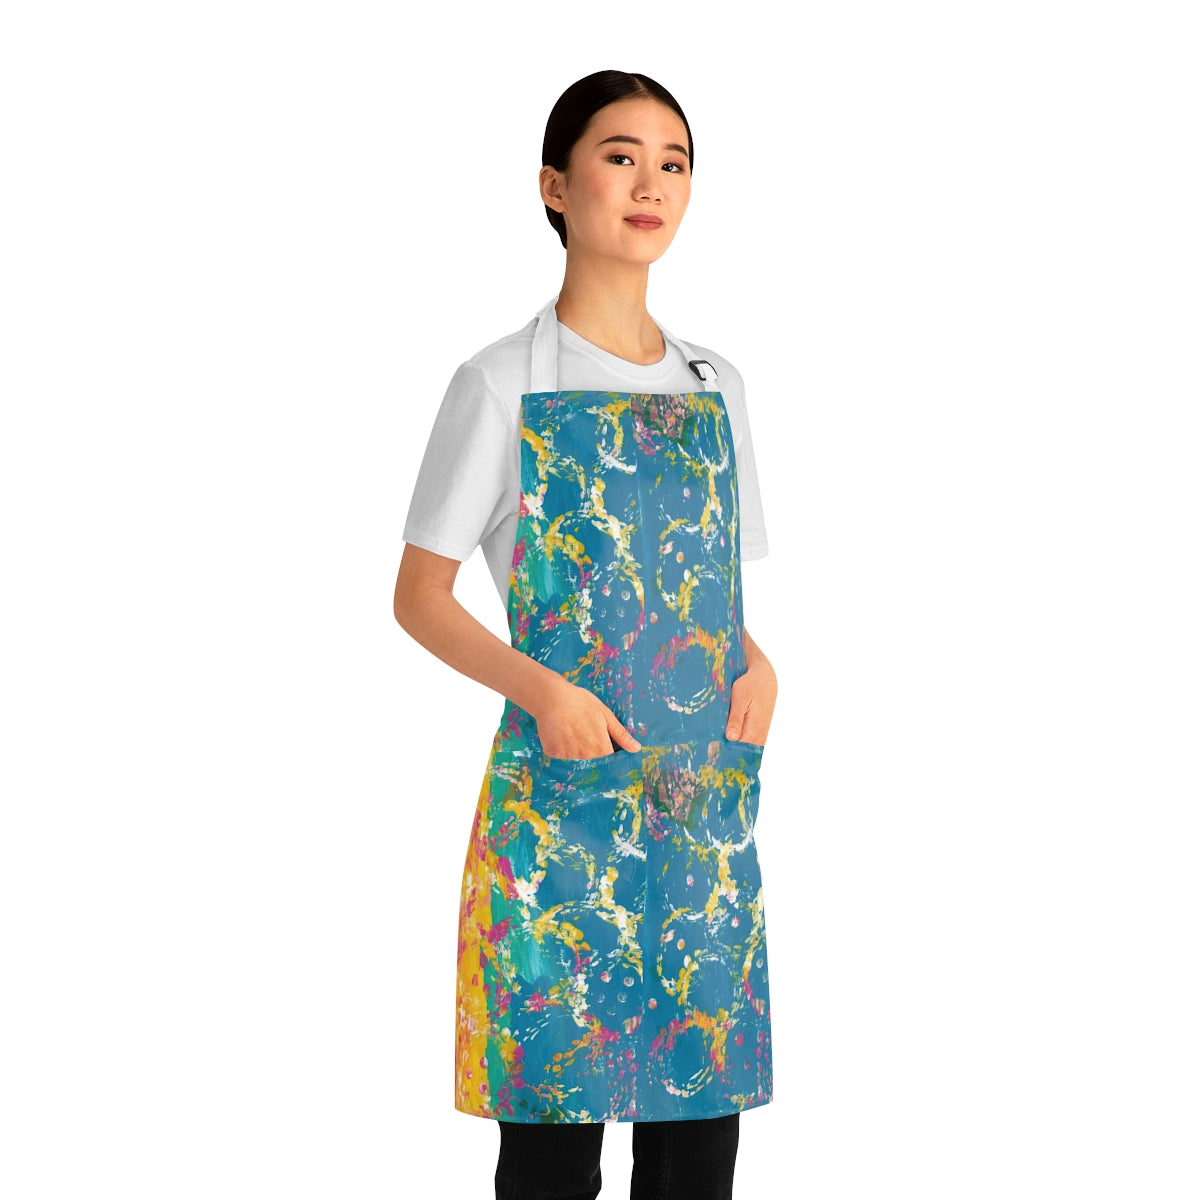 apron with blue and yellow pattern